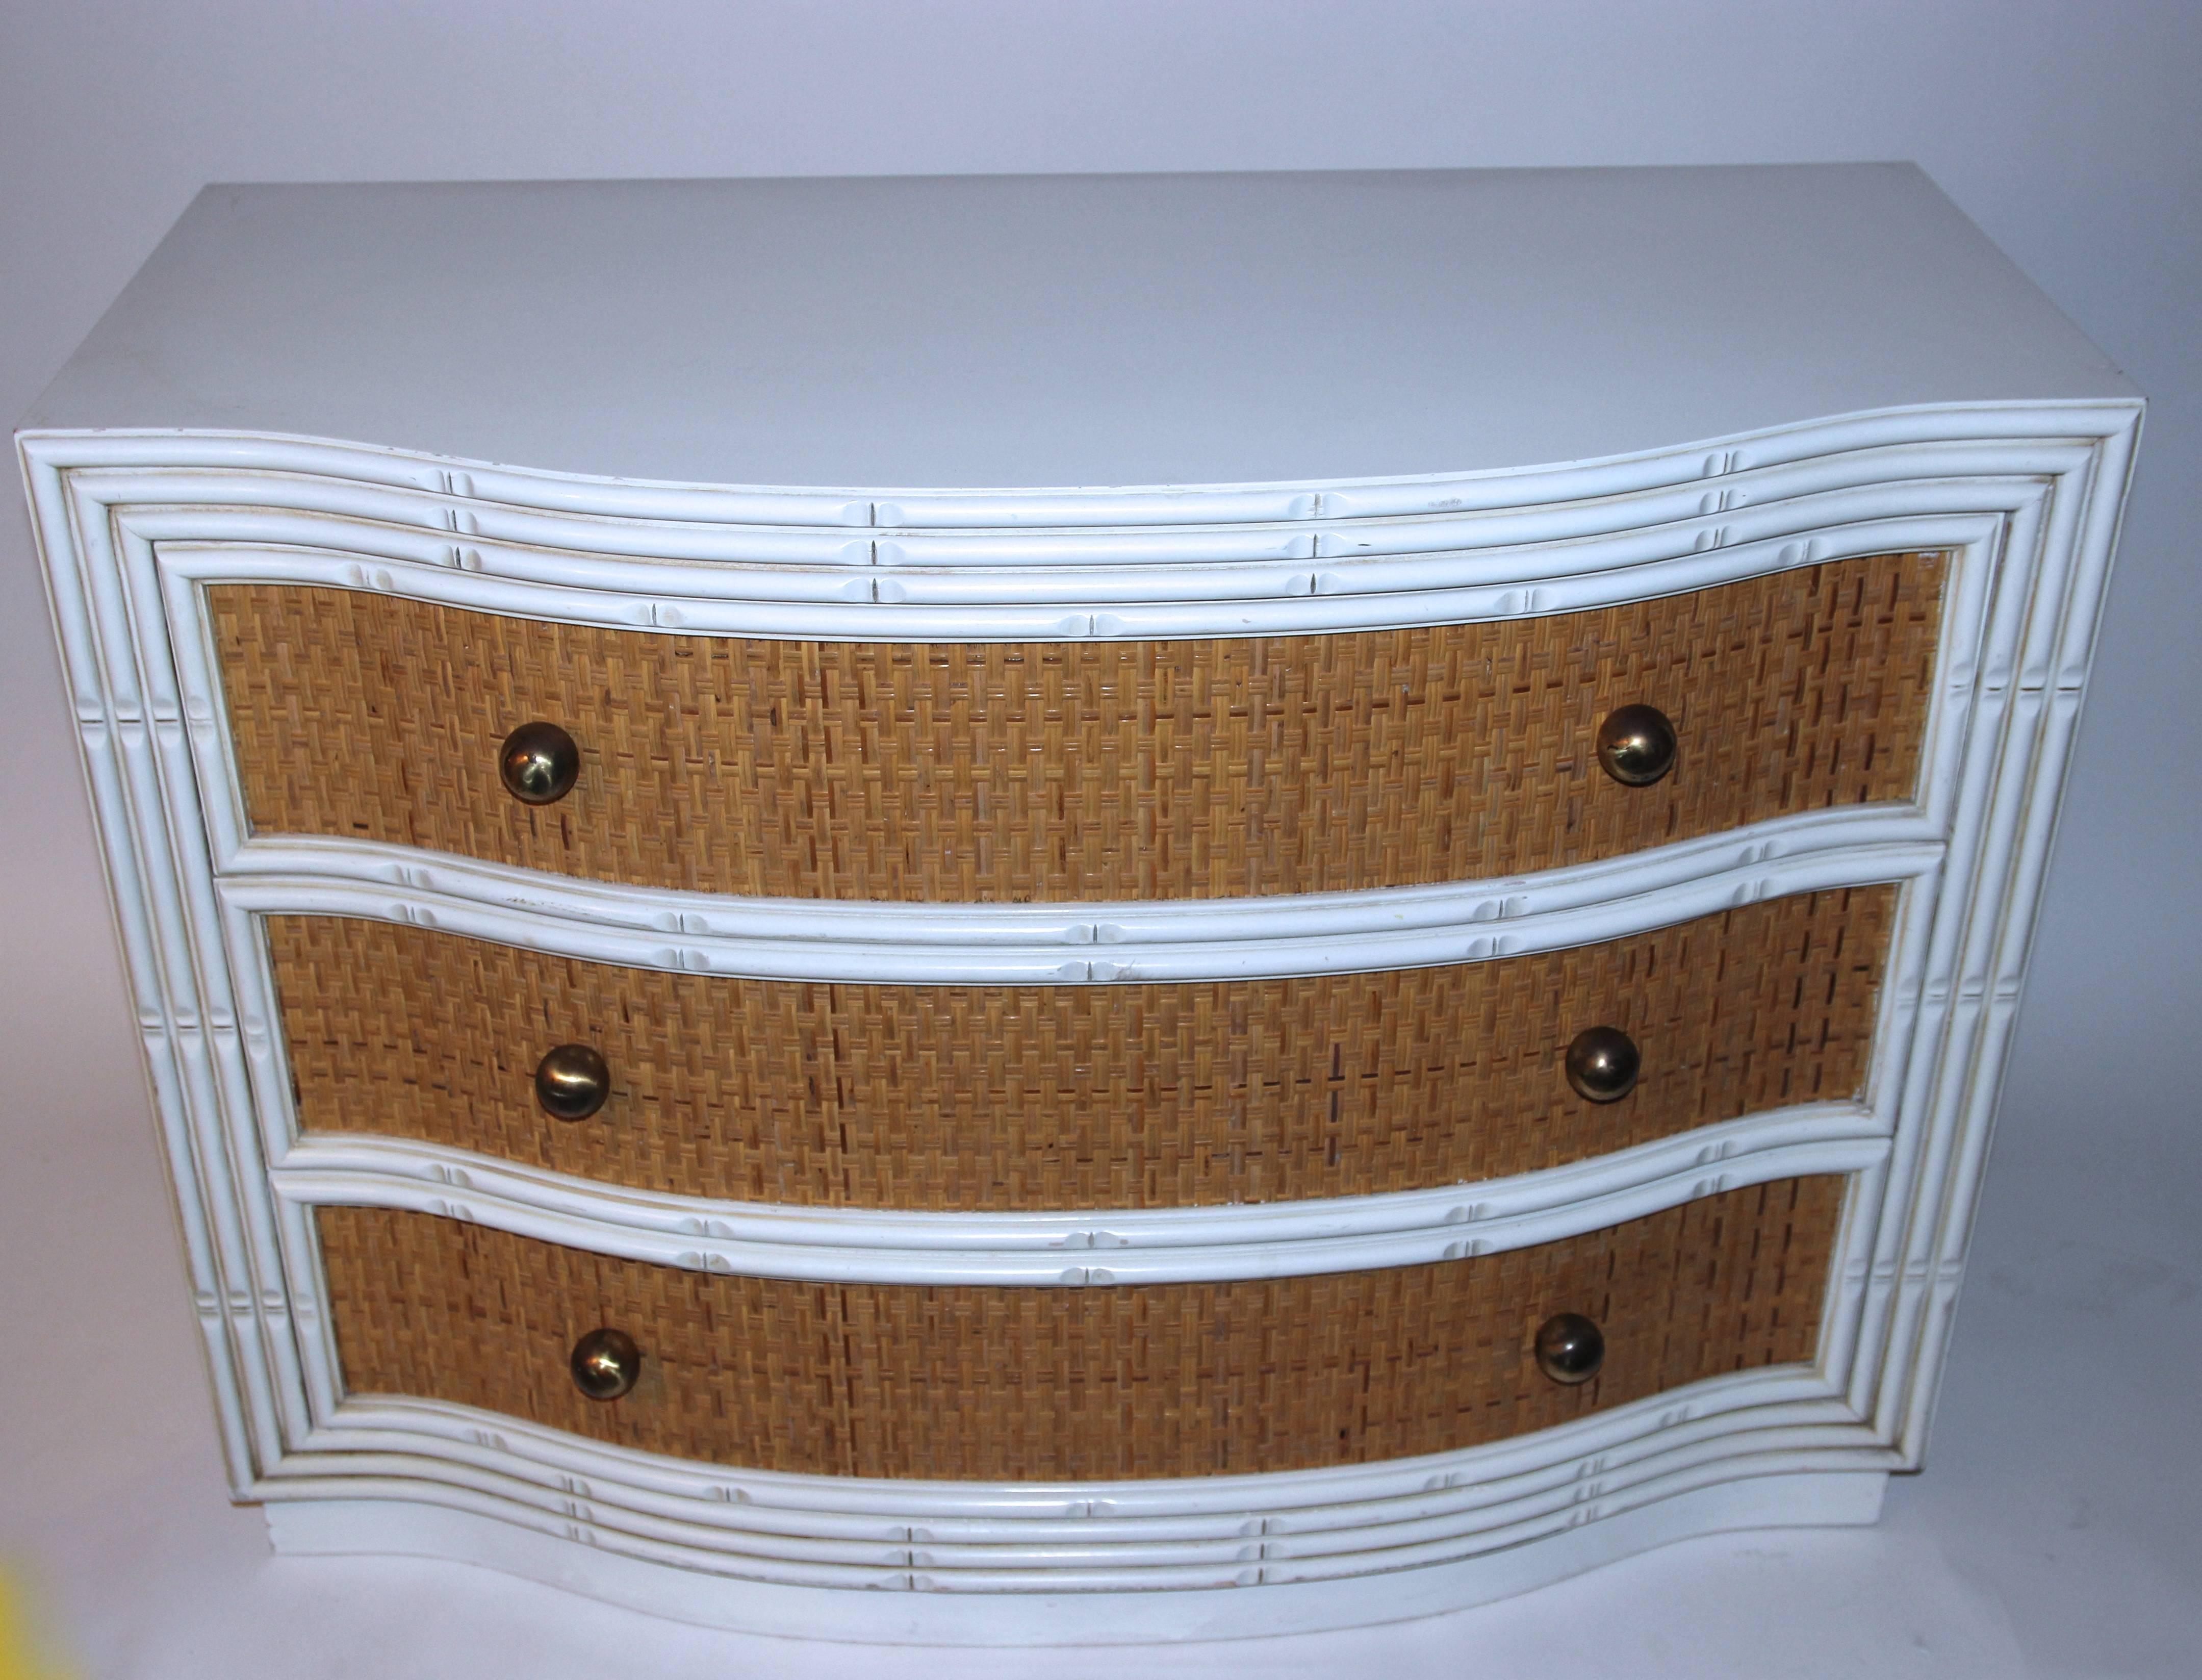 Chest of three drawers,
Rattan and lacquered wood,
circa 1970, France.
Measures: Height: 76 cm, width: 107 cm, depth: 51 cm.